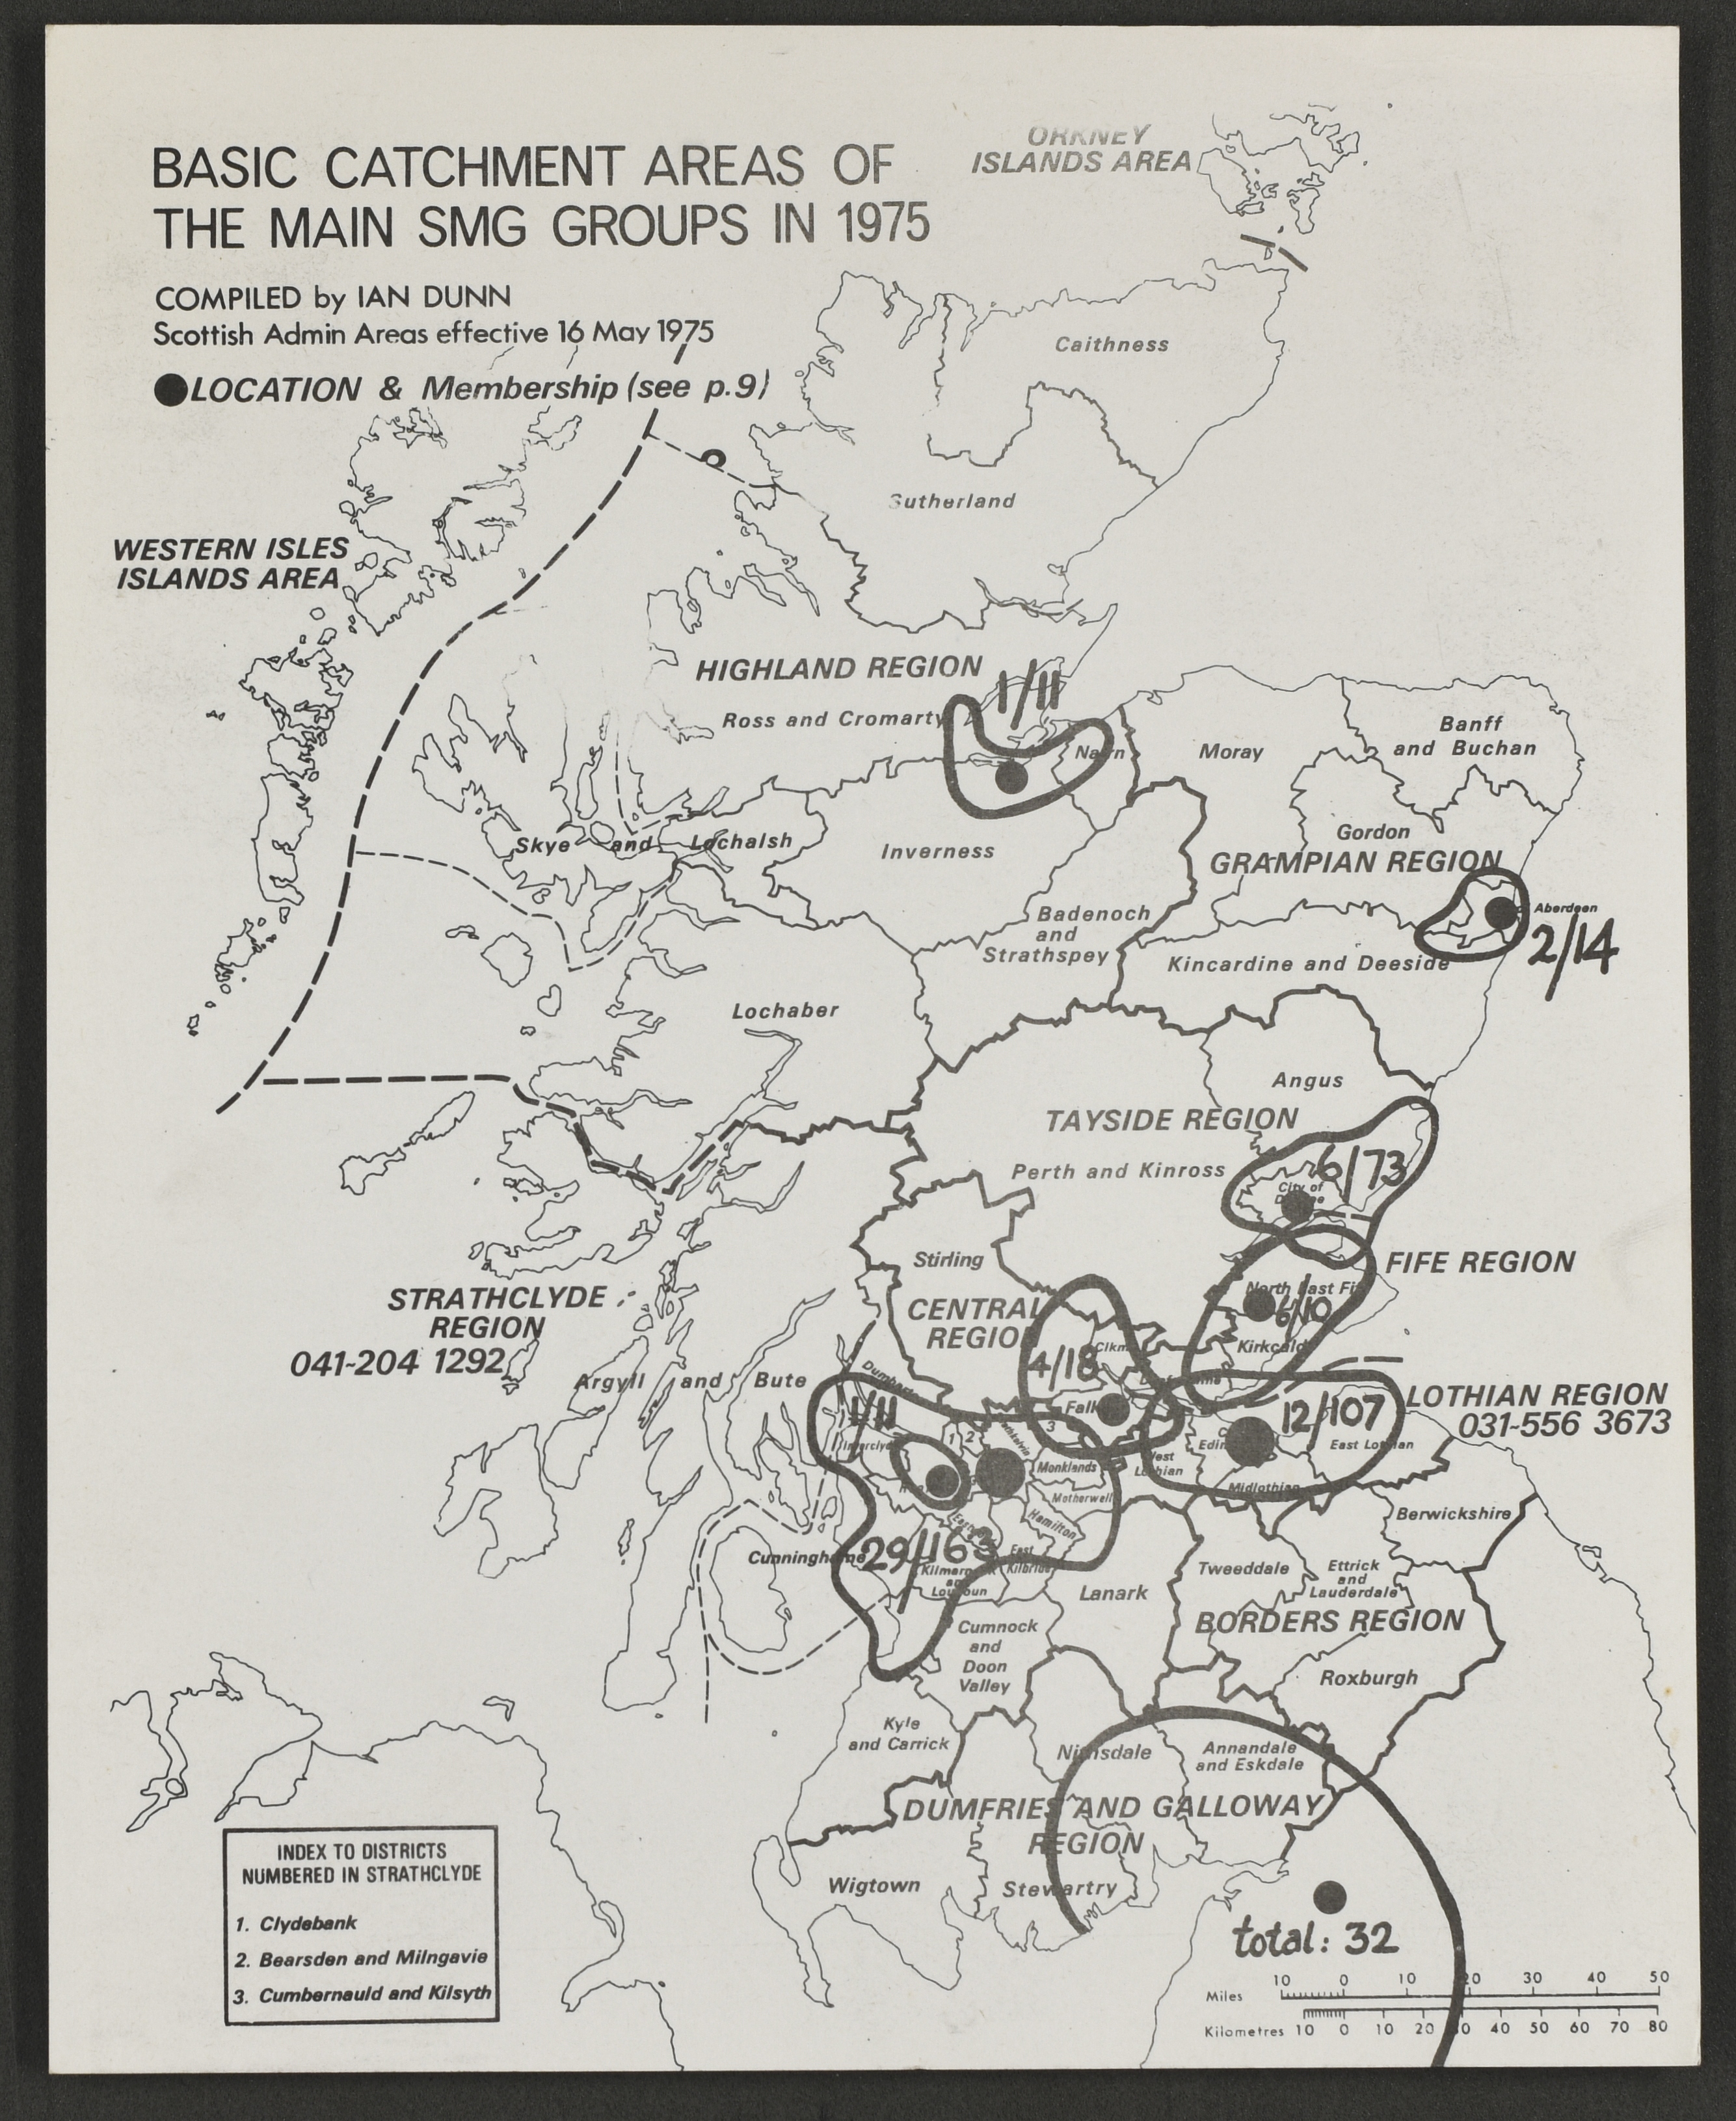 Catchment areas of the main SMG groups in 1975